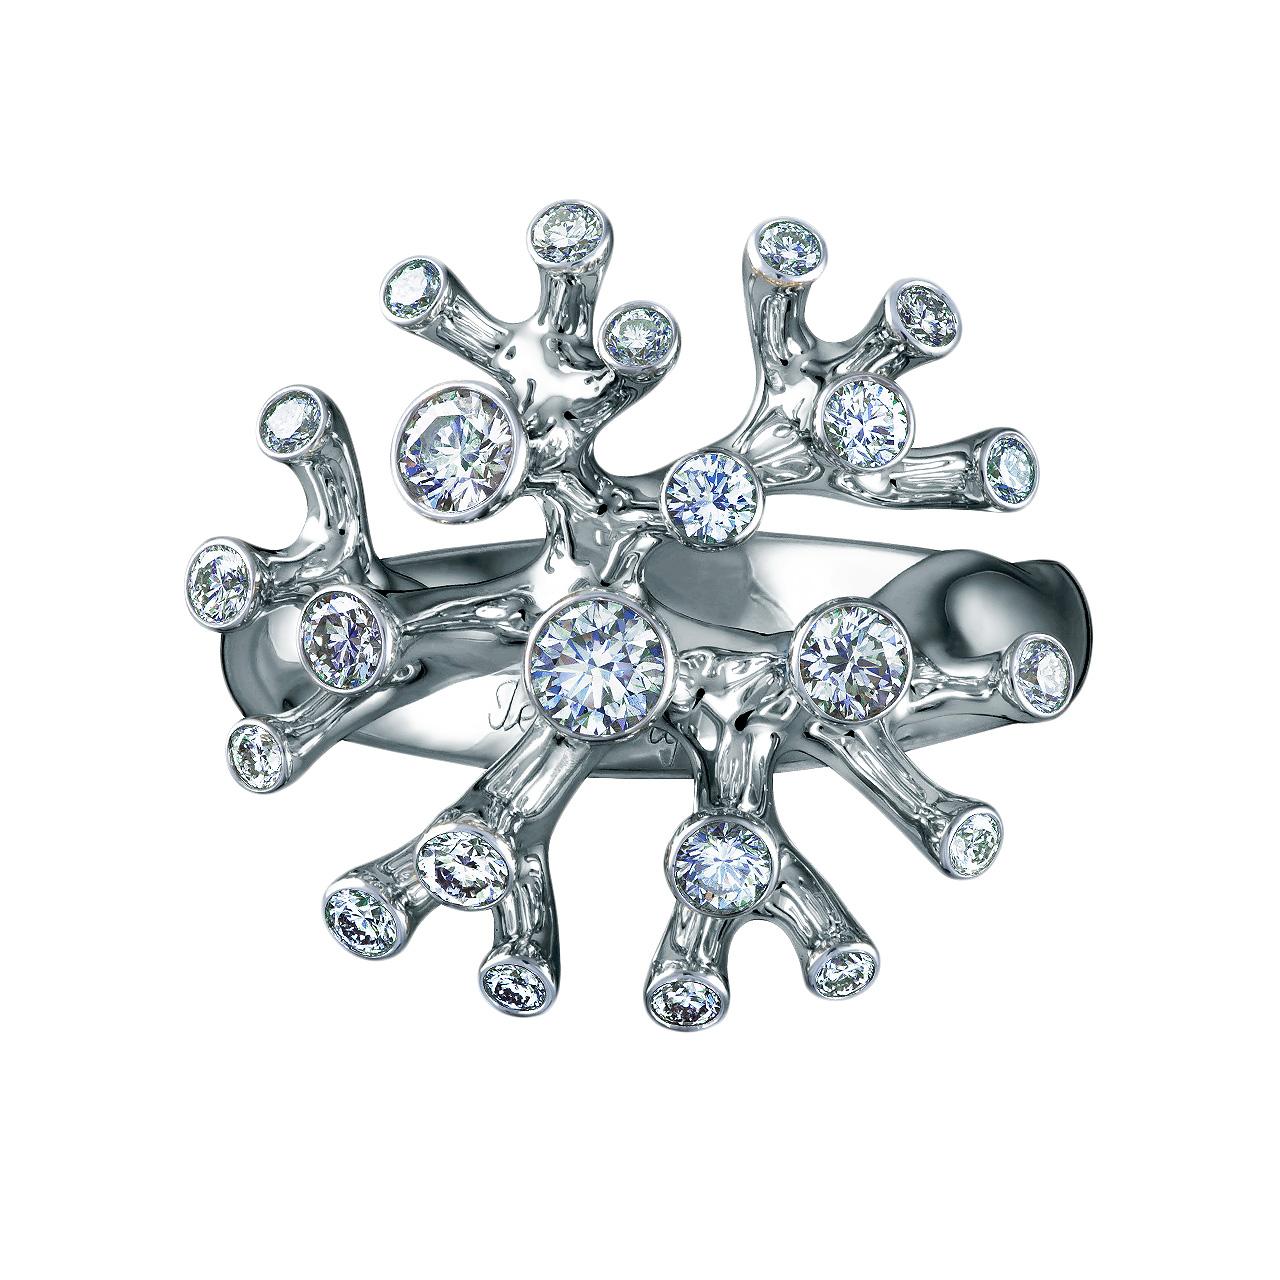 - 24 Round Diamonds - 0.85 ct, E-F/ VS
- 18K White Gold 
- Weight: 10.90 g
- Size: 17 mm
The ring from the Corals collection of Jewellery Theatre in 18k white gold decorated 0.85 ct of diamonds. Ring has a heel at the bottom decorated with a